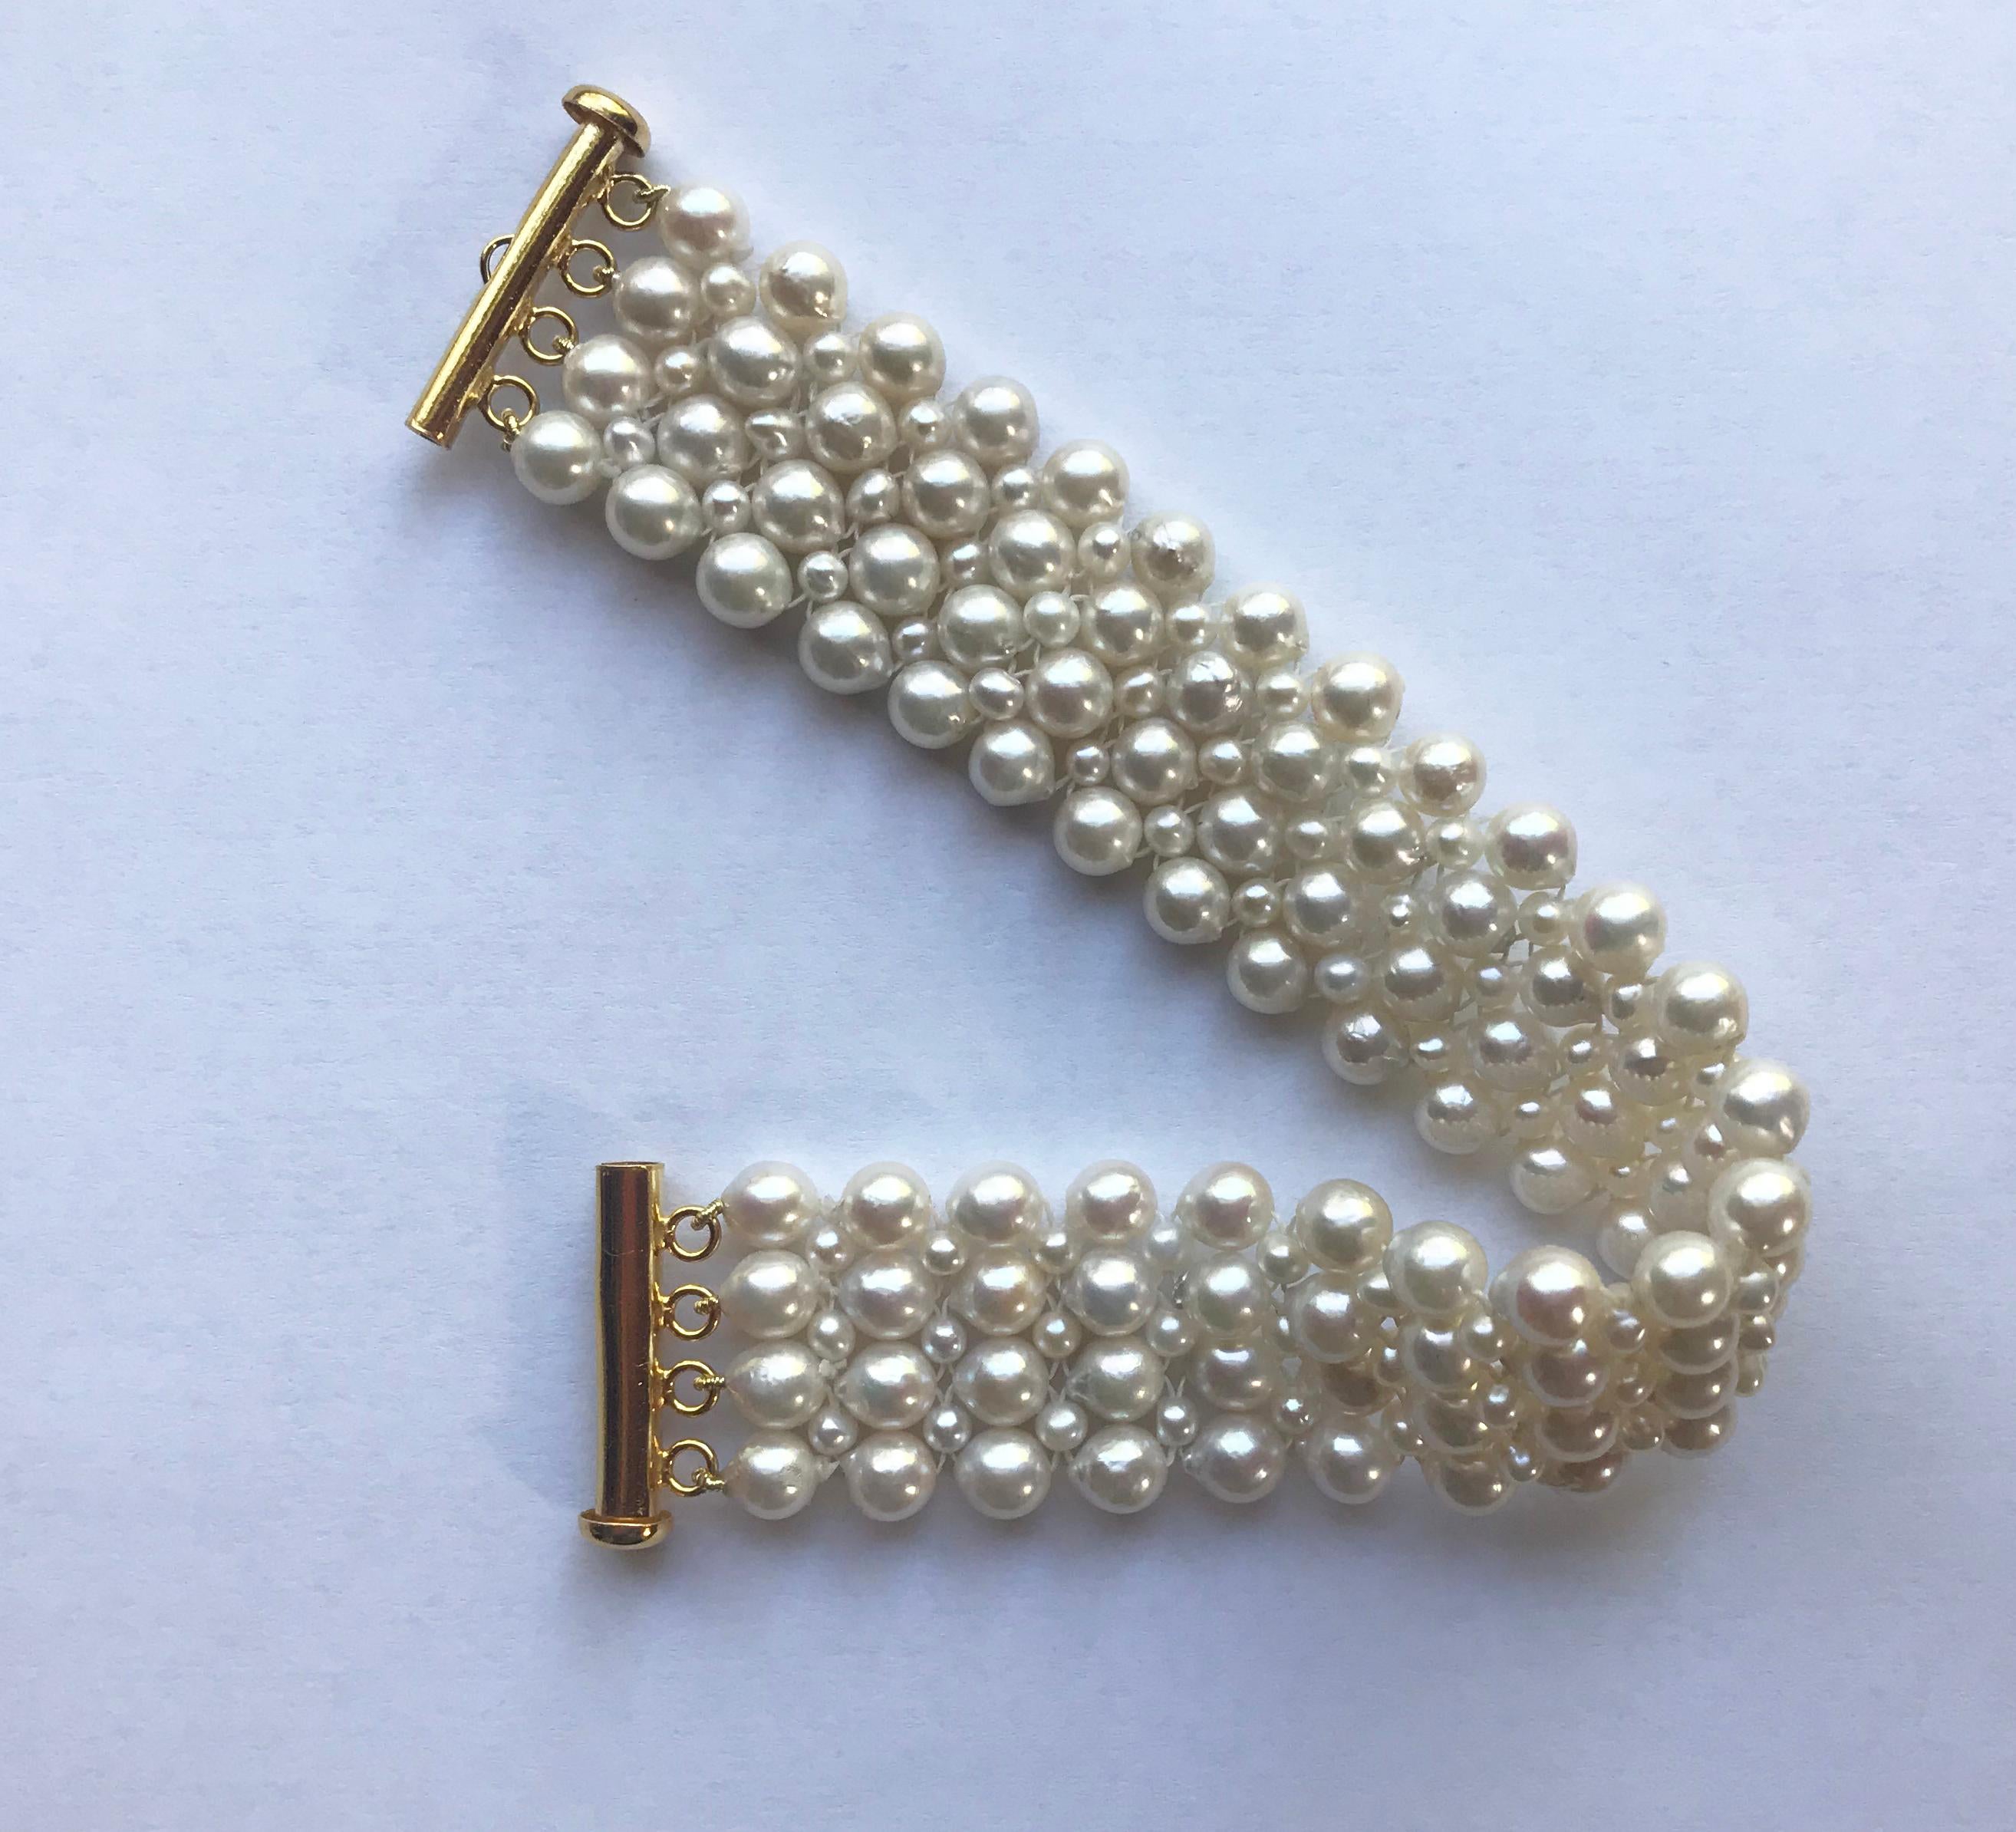 Marina J. Woven Pearl Bracelet with 14 Karat Yellow Gold-Plated Clasp For Sale 3